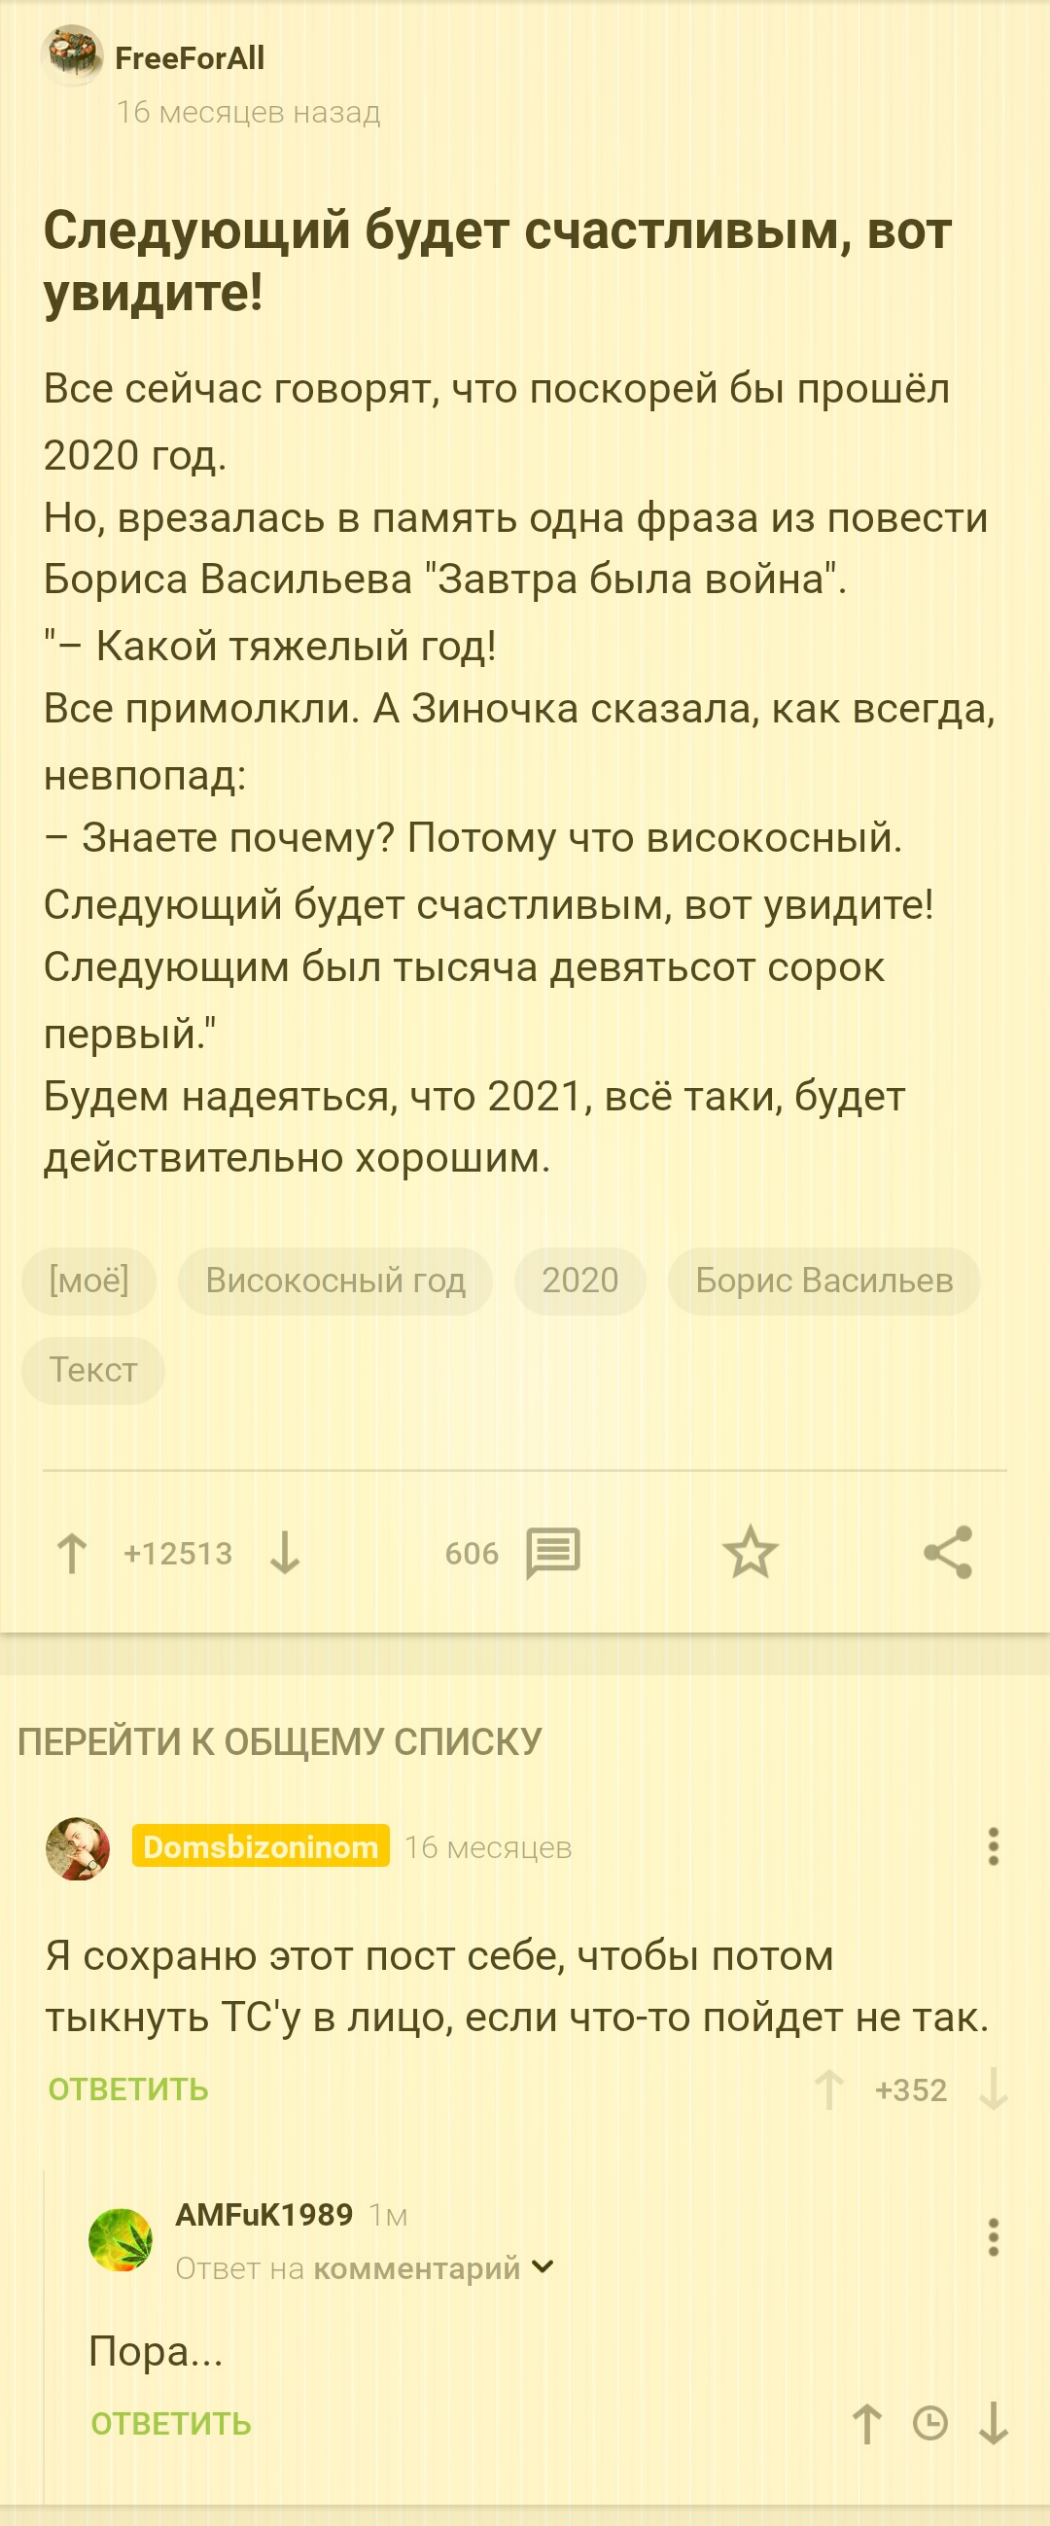 Response to the post The next one will be happy, you'll see! - My, Leap year, 2020, Boris Vasiliev, Screenshot, Comments on Peekaboo, 2021, Reply to post, Longpost